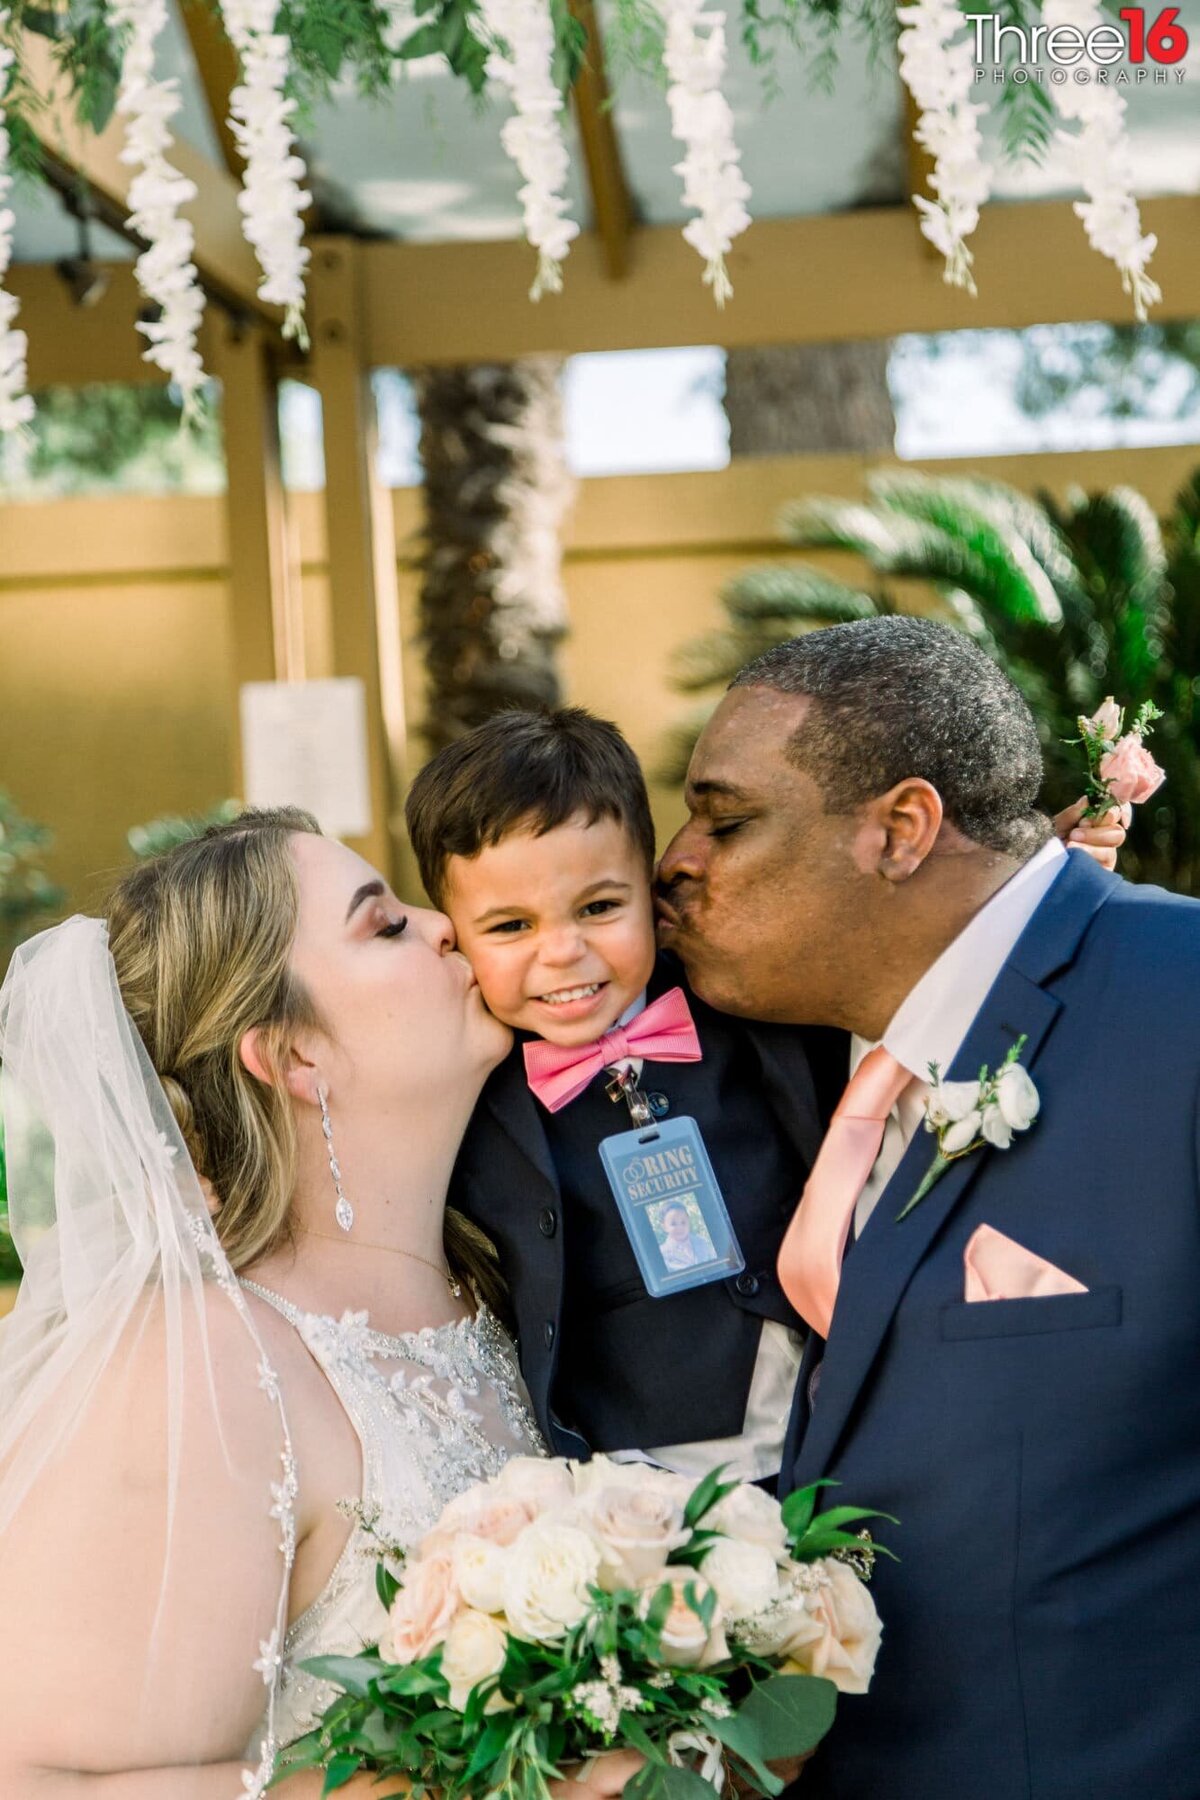 Newly married couple kiss their son on the cheeks